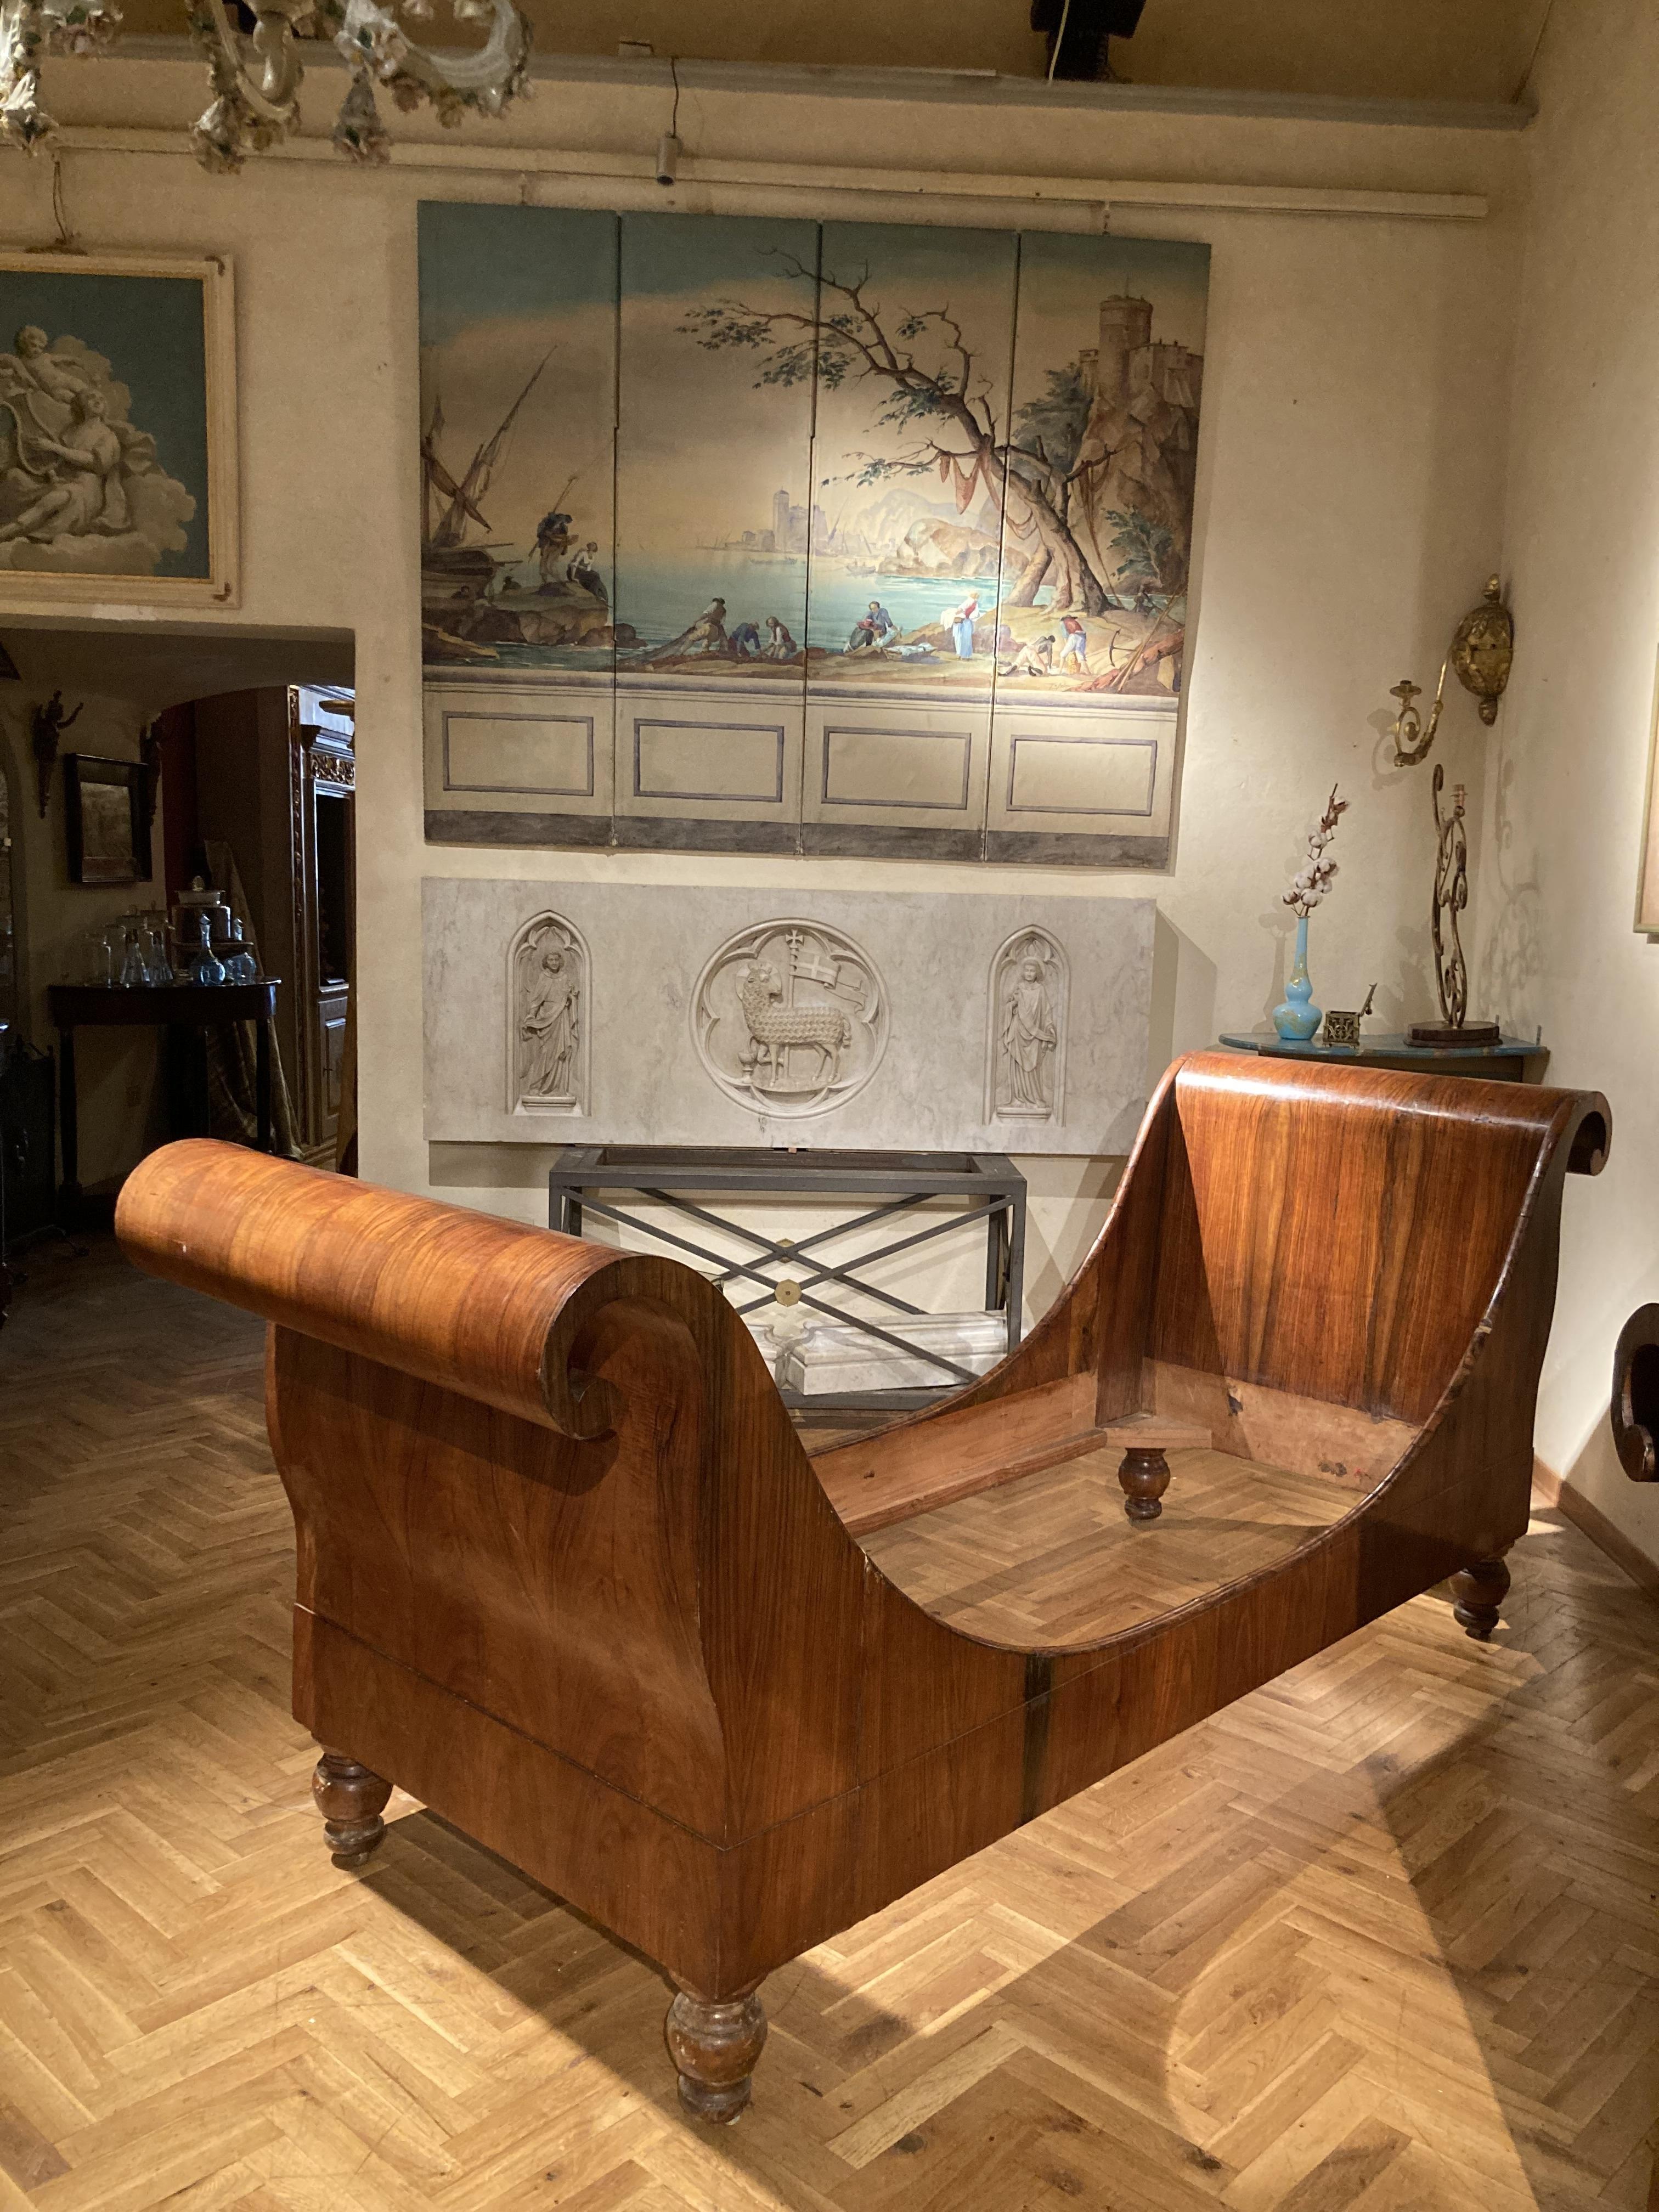 These two exceptional Italian 19th century Empire period sleigh beds dating back to 1790-1830 were sourced in Lucca, Tuscany. The beds, that can serve also as a daybeds or settee, show a sophisticated execution sign of high quality cabinet making.